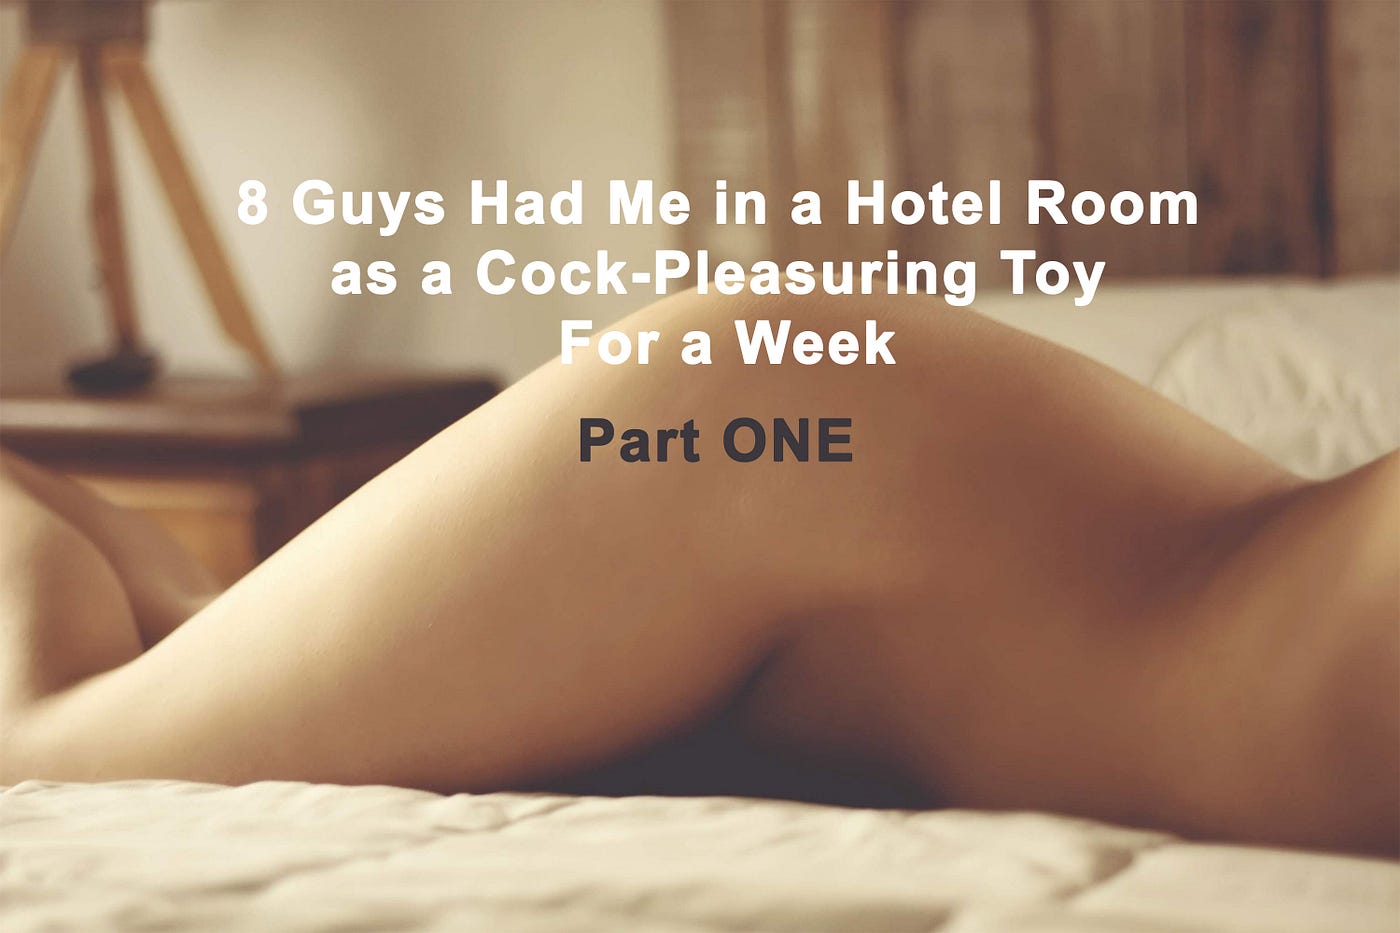 8 Guys Had Me In a Hotel Room as a Cock-Pleasuring Toy For a Week Part 1 by Delisha Keane Bare Skin Cafe Medium picture